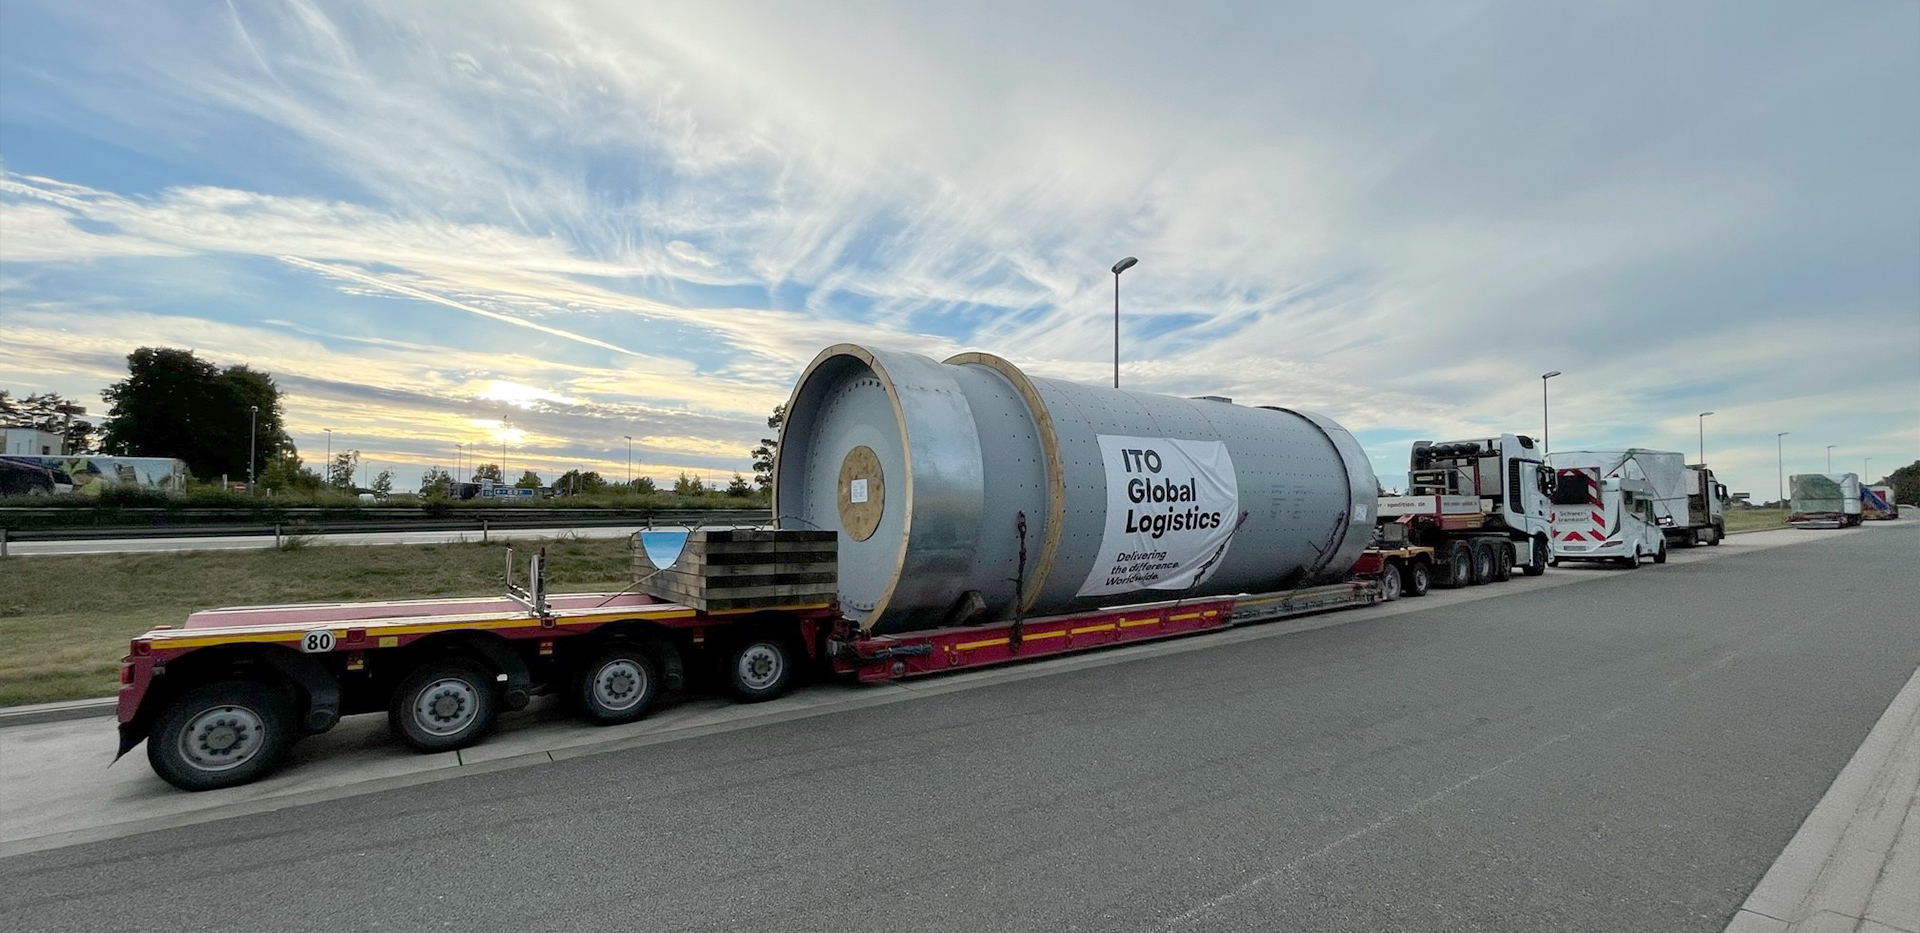 A Mill Shell on the Move